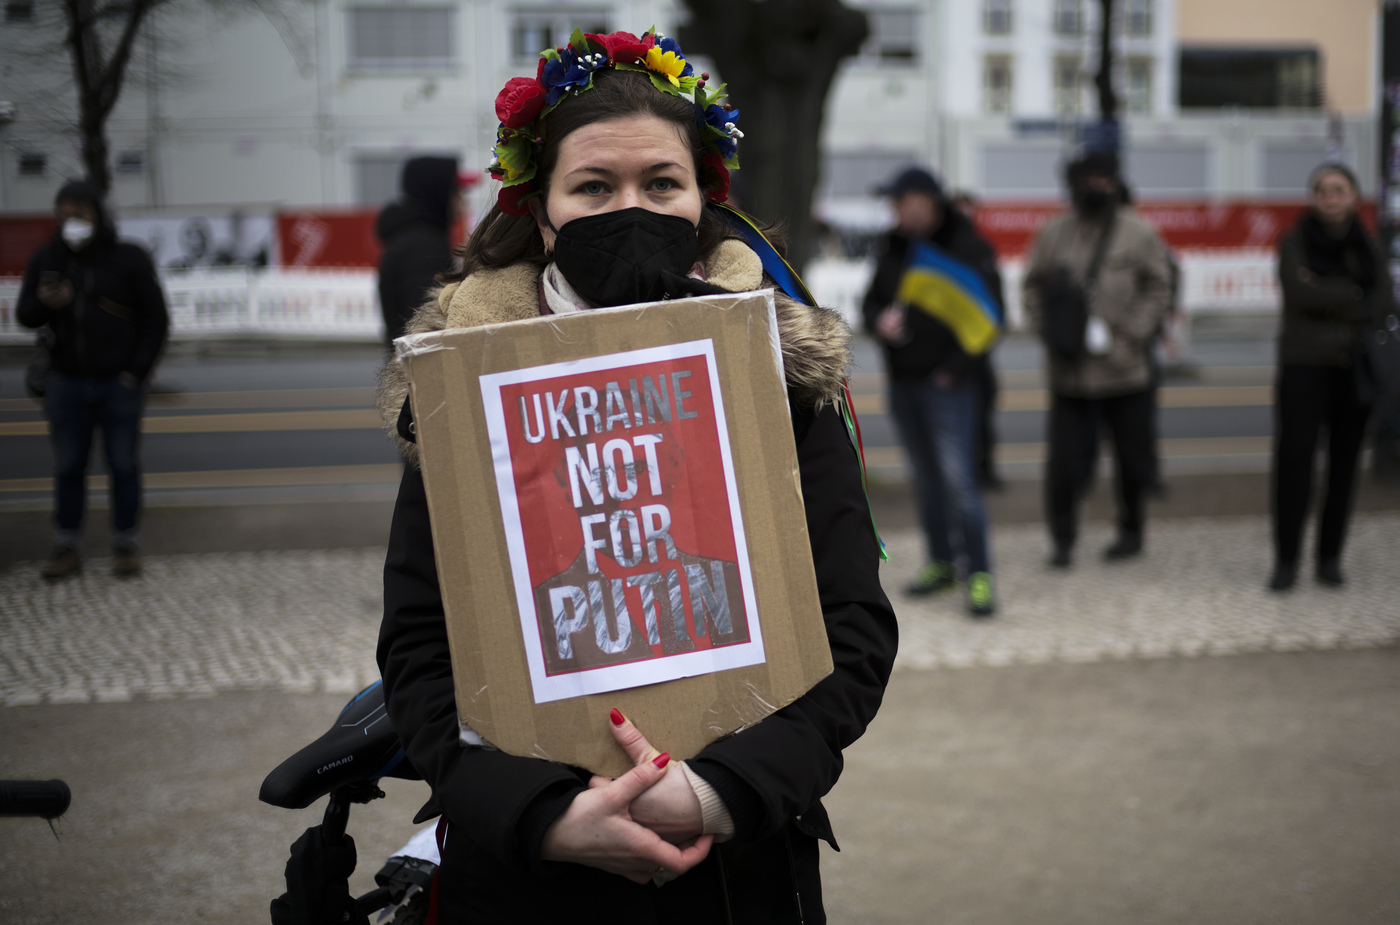 A woman attends a protest against the Russian invasion in the Ukraine in front of the Russian embassy in Berlin, Germany, Friday, Feb. 25, 2022. (AP Photo/Markus Schreiber)